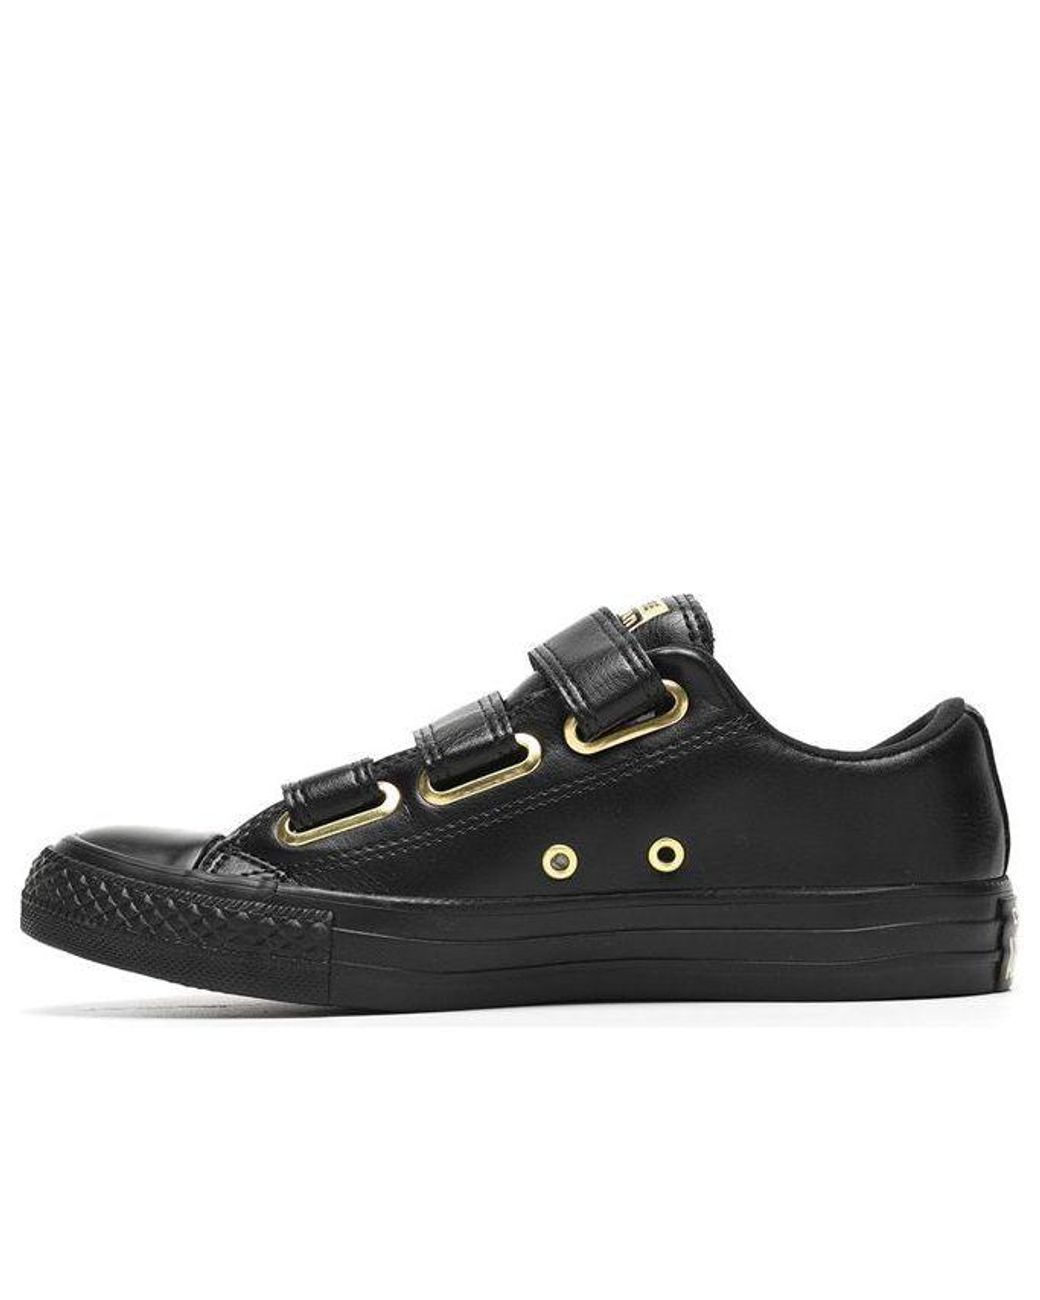 Converse All Star Ctas 3v Ox in Black | Lyst